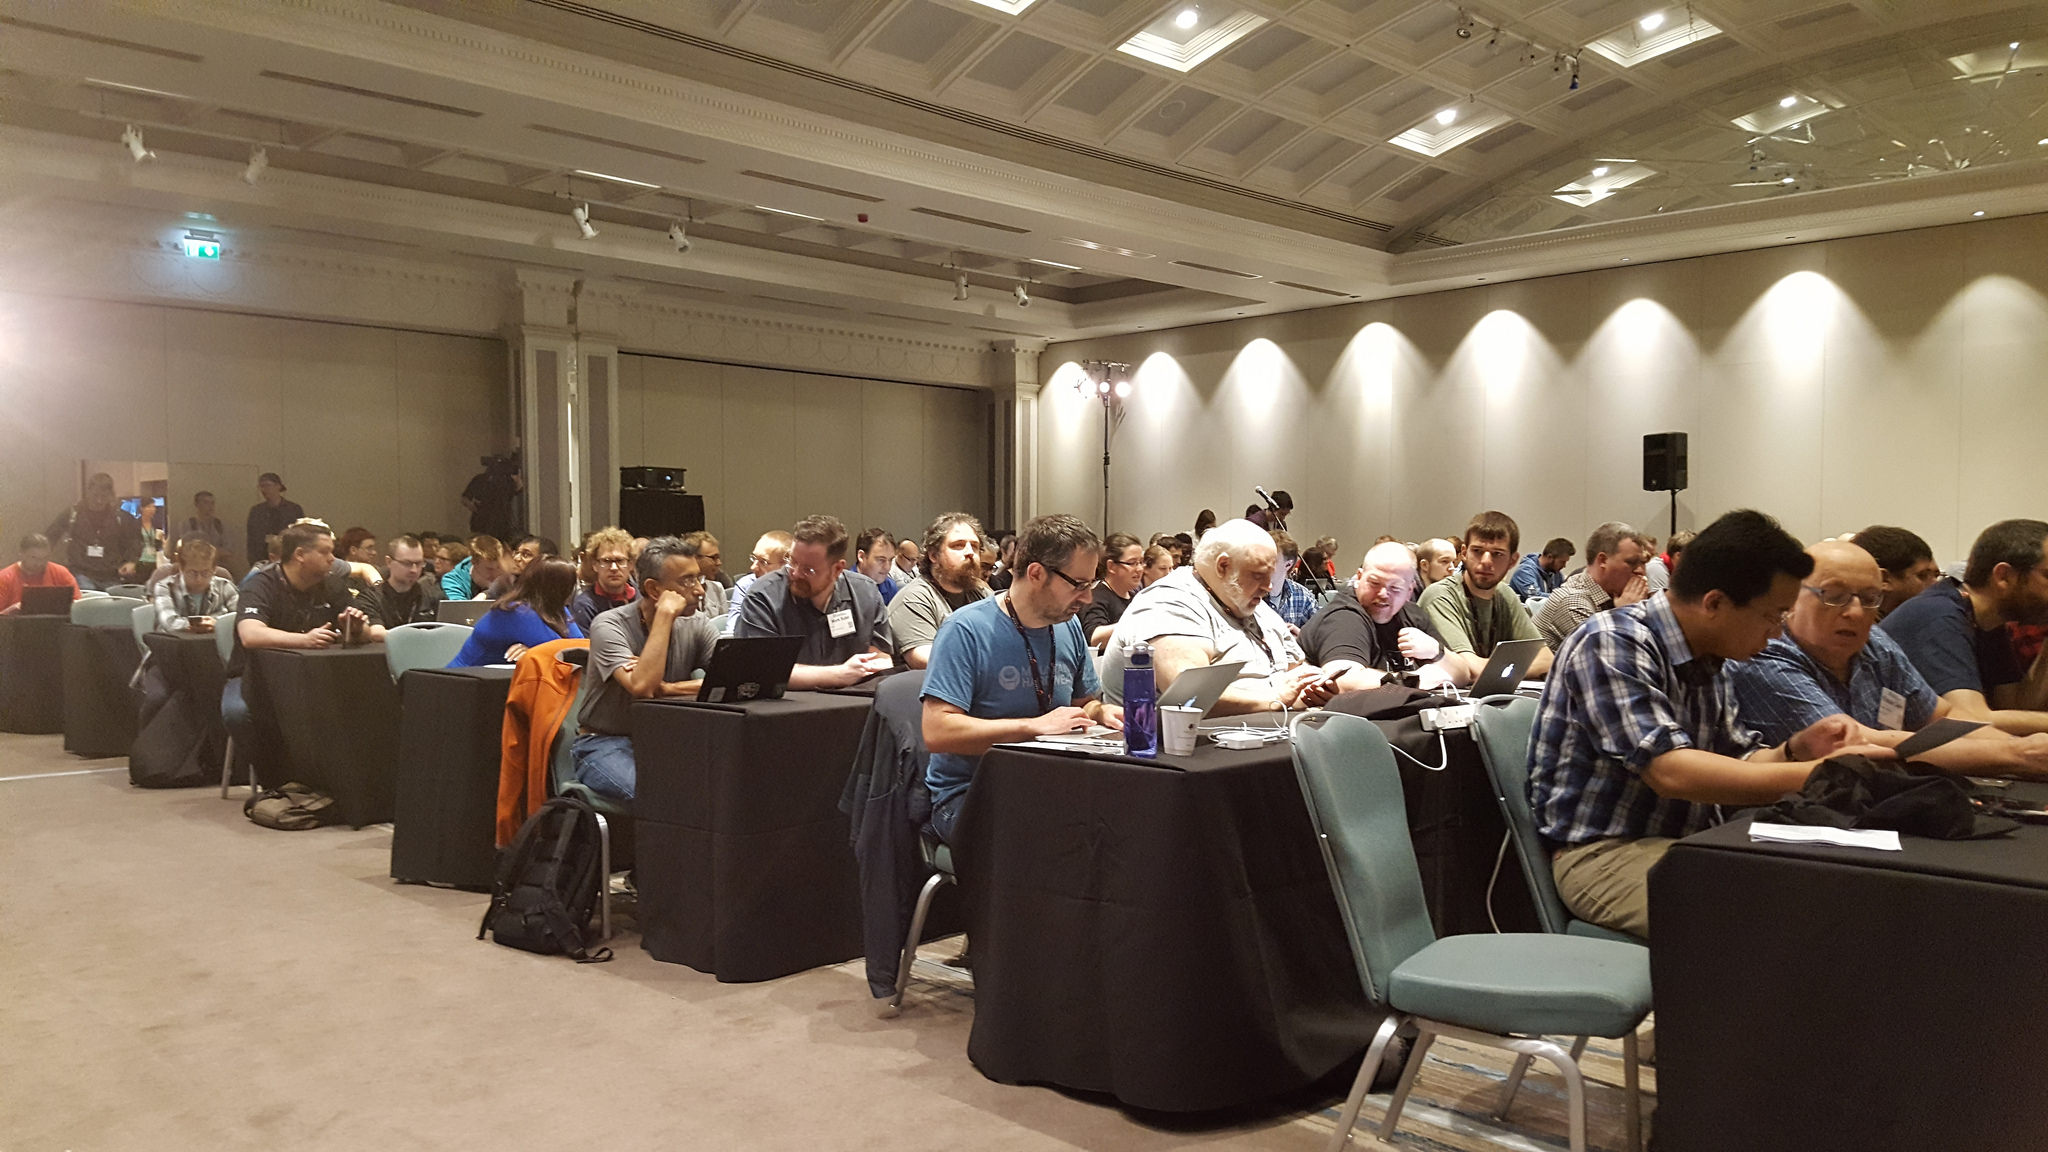 Attendees at SRECon